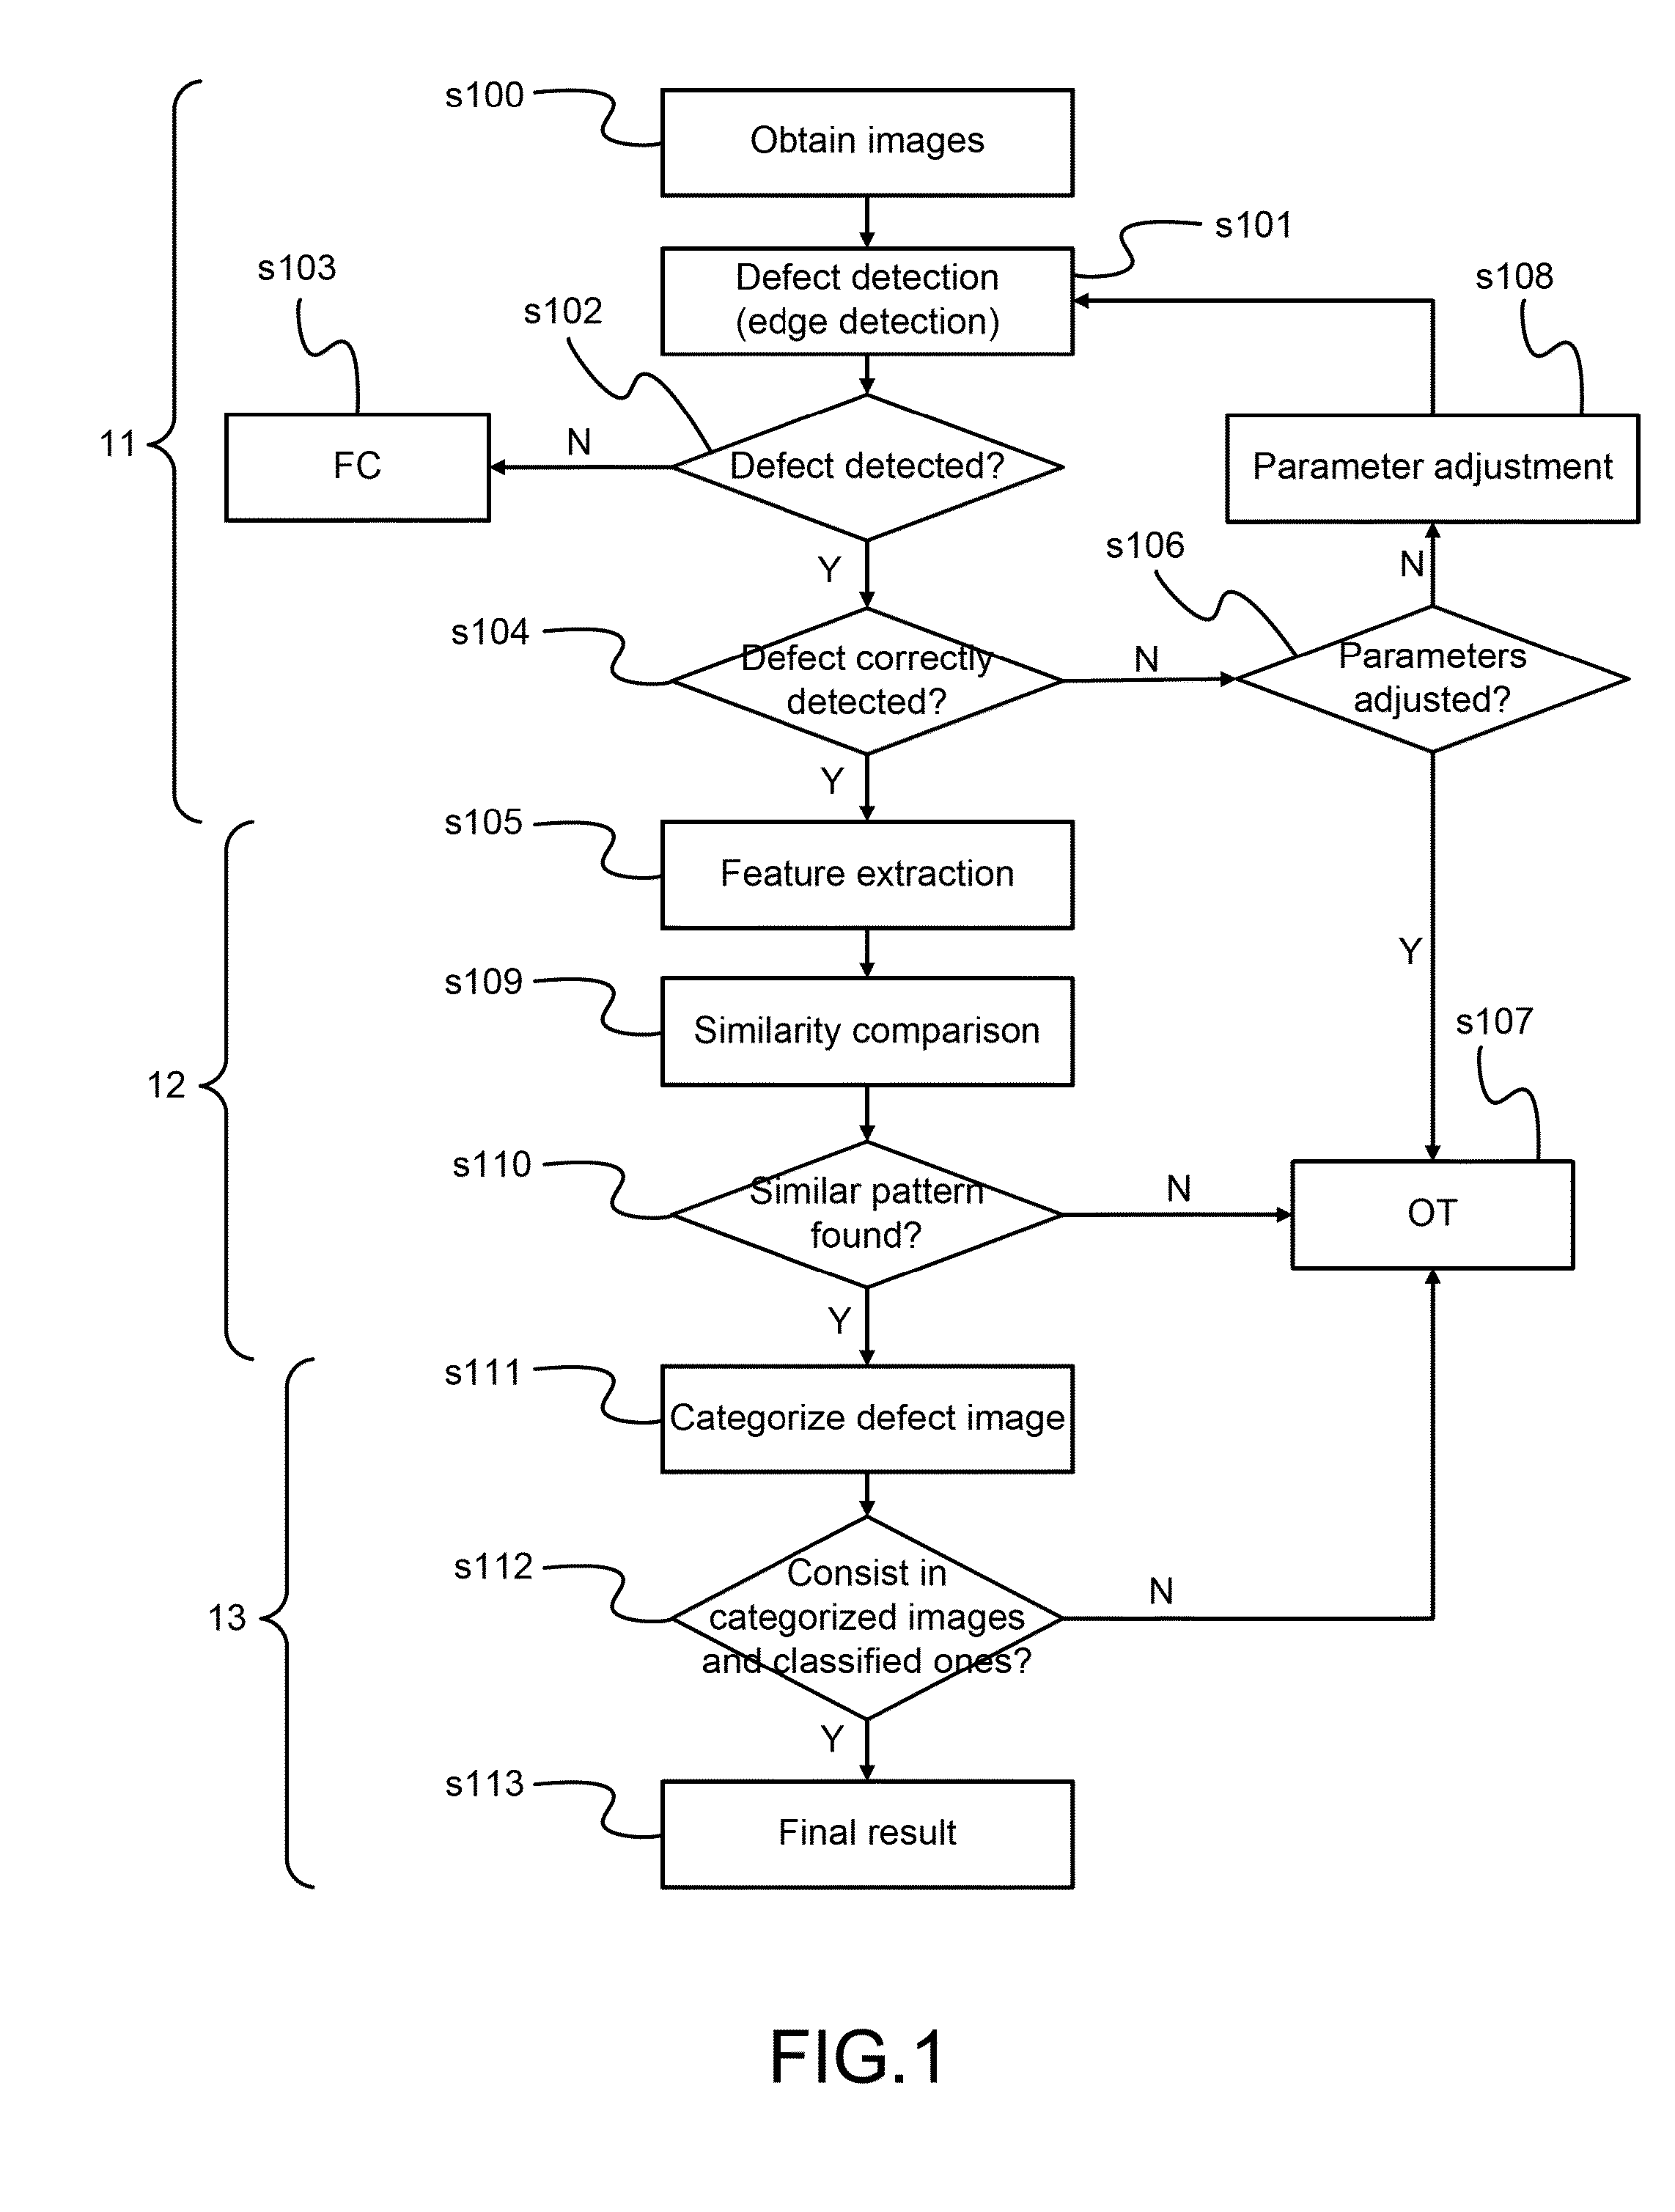 Method of Defect Image Classification through Integrating Image Analysis and Data Mining